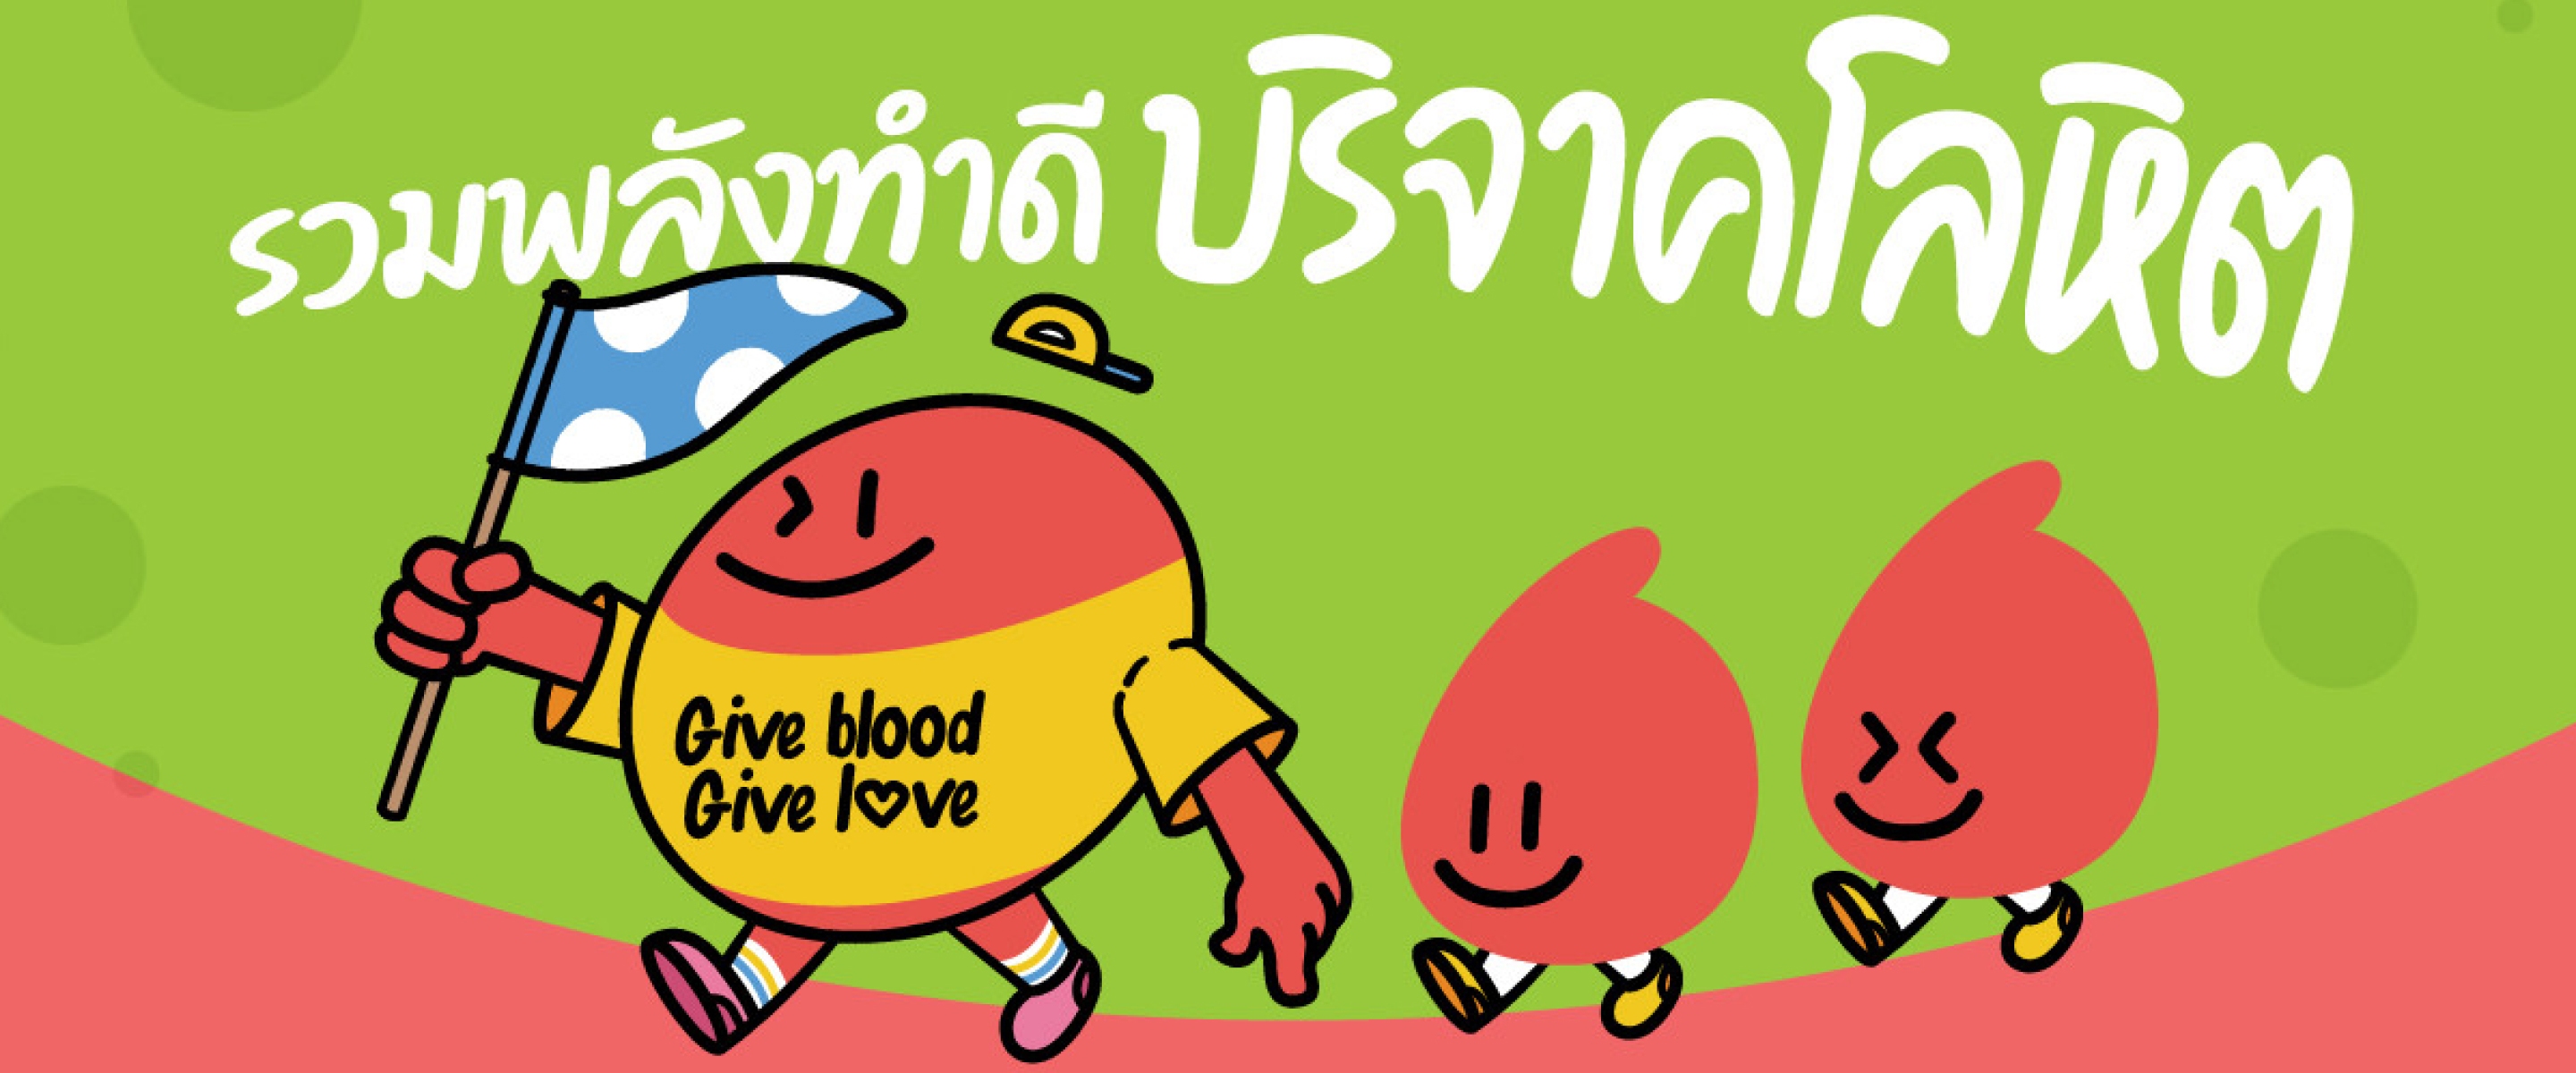 Give Blood Give Love